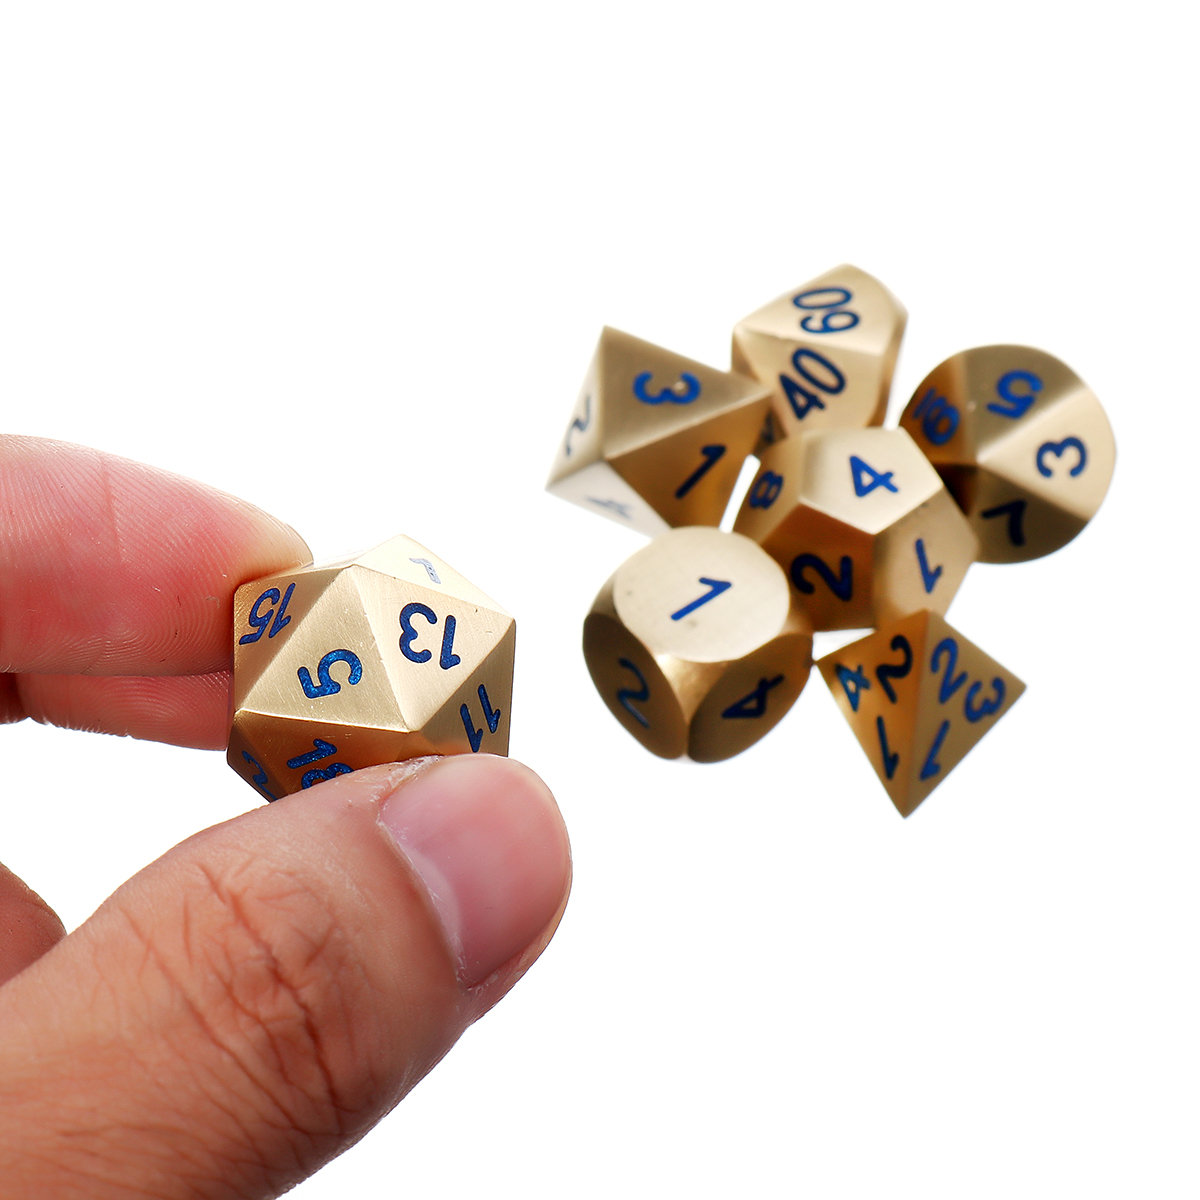 Pure-Copper-Polyhedral-Dices-Set-Metal-Role-Playing-Game-Dice-Gadget-for-Dungeons-Dragon-Games-Gift-1608120-2